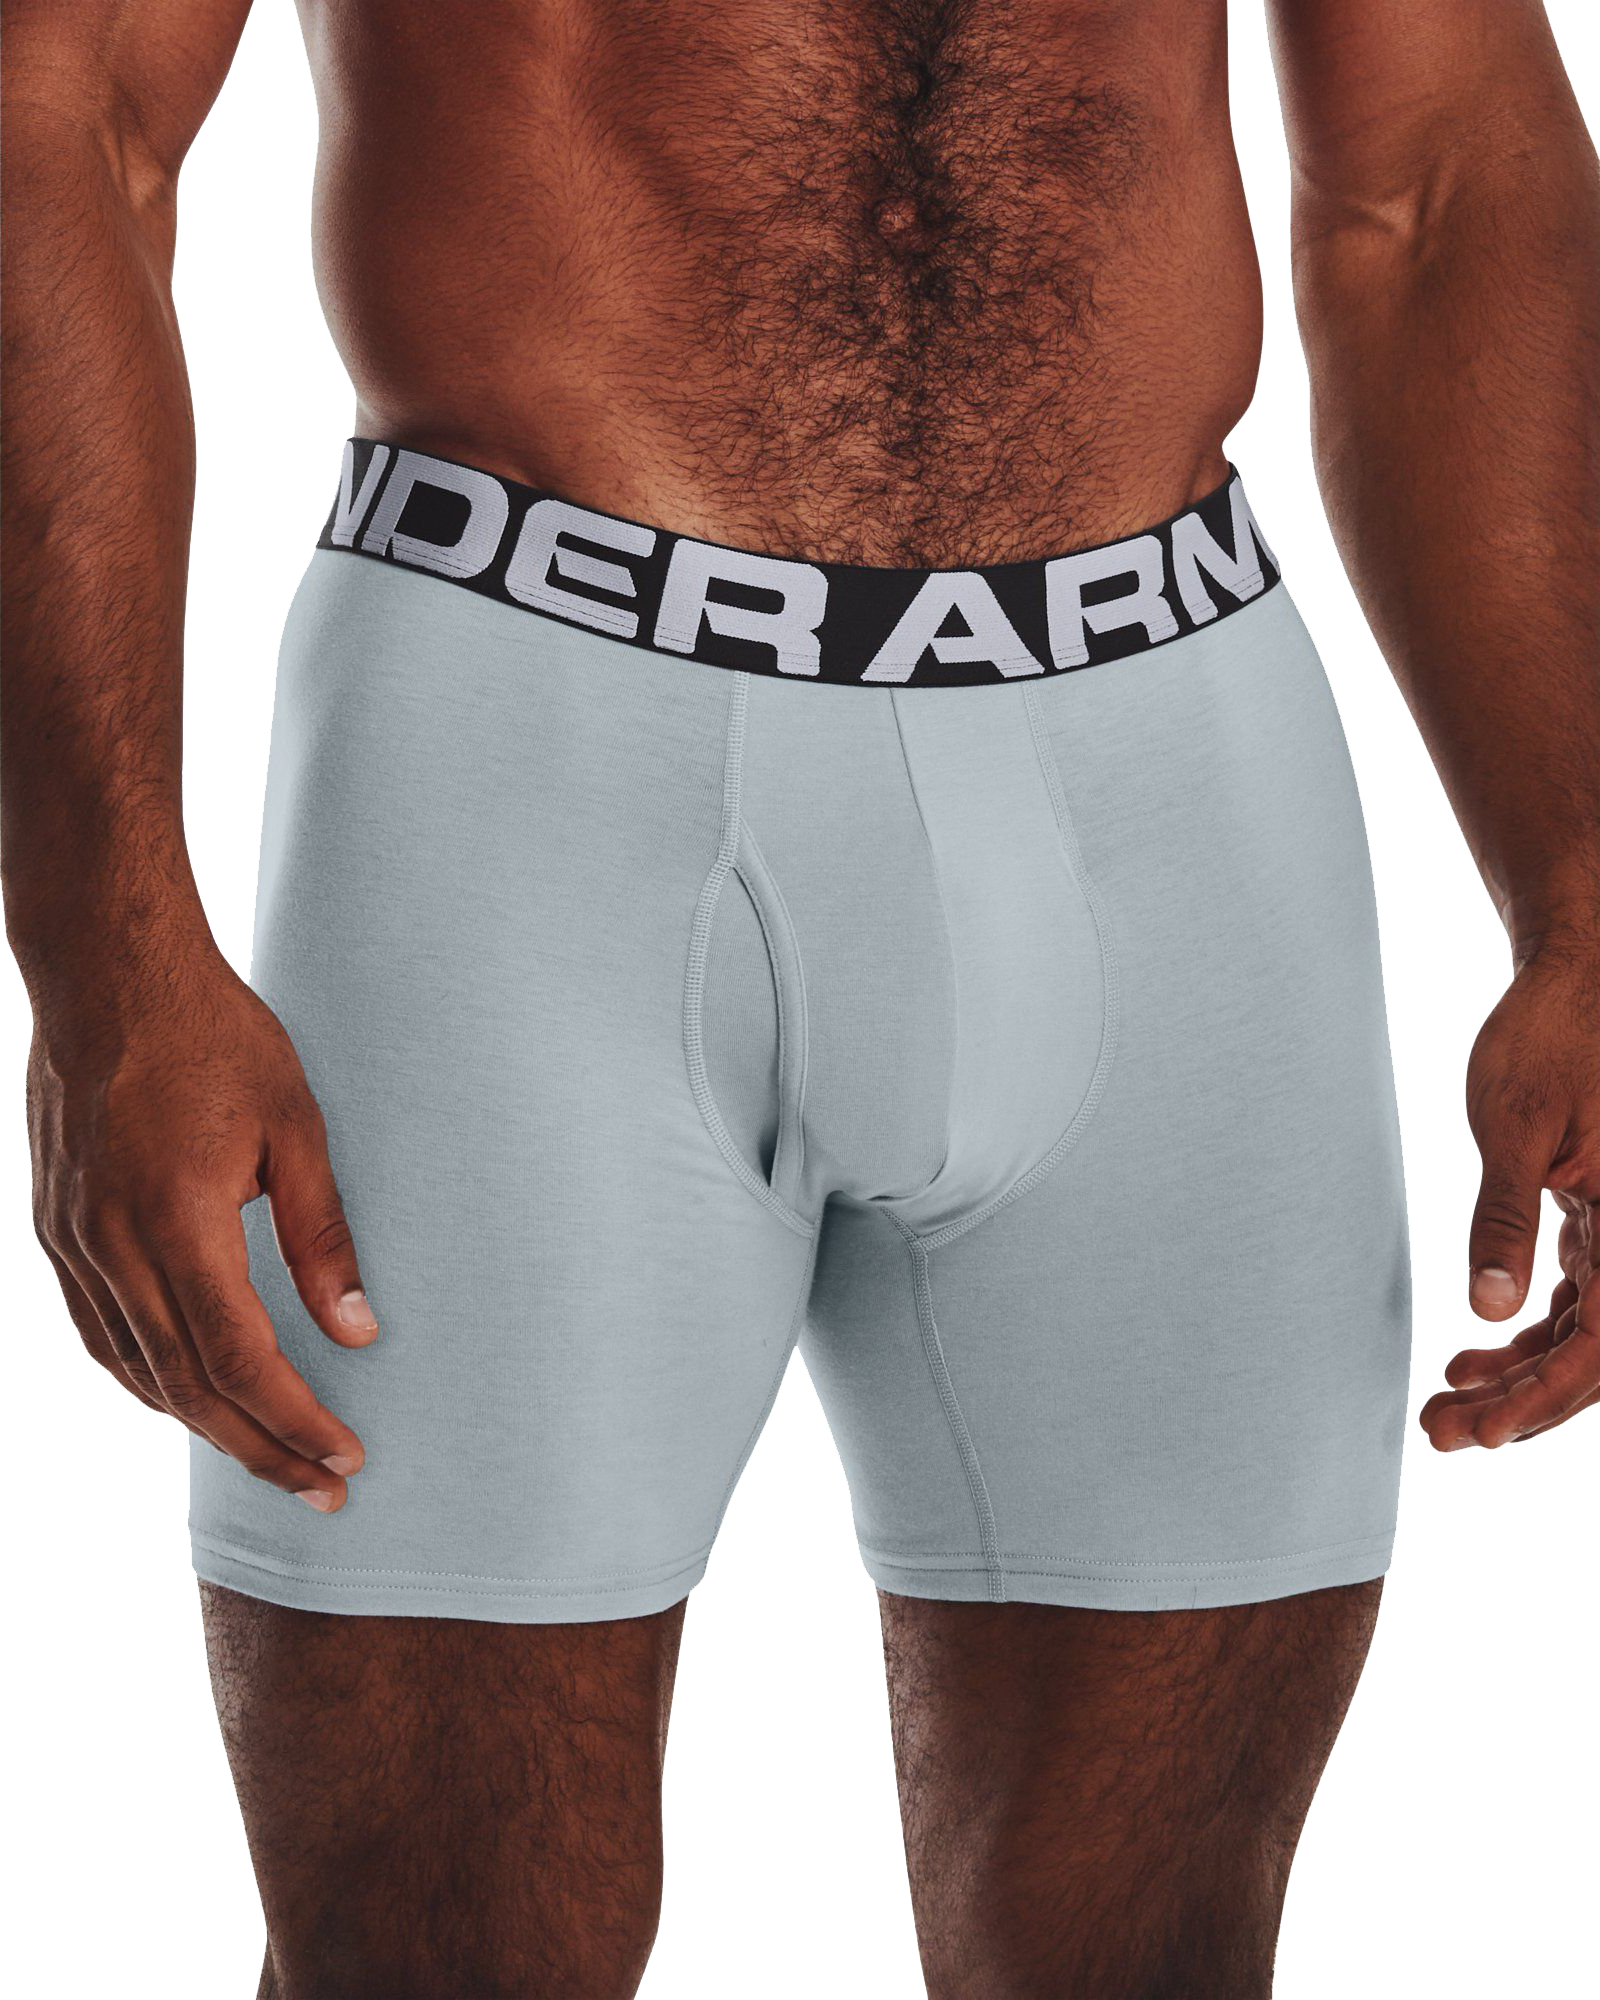 Under Armour Charged Cotton 6"" Boxerjock for Men 3-Pack